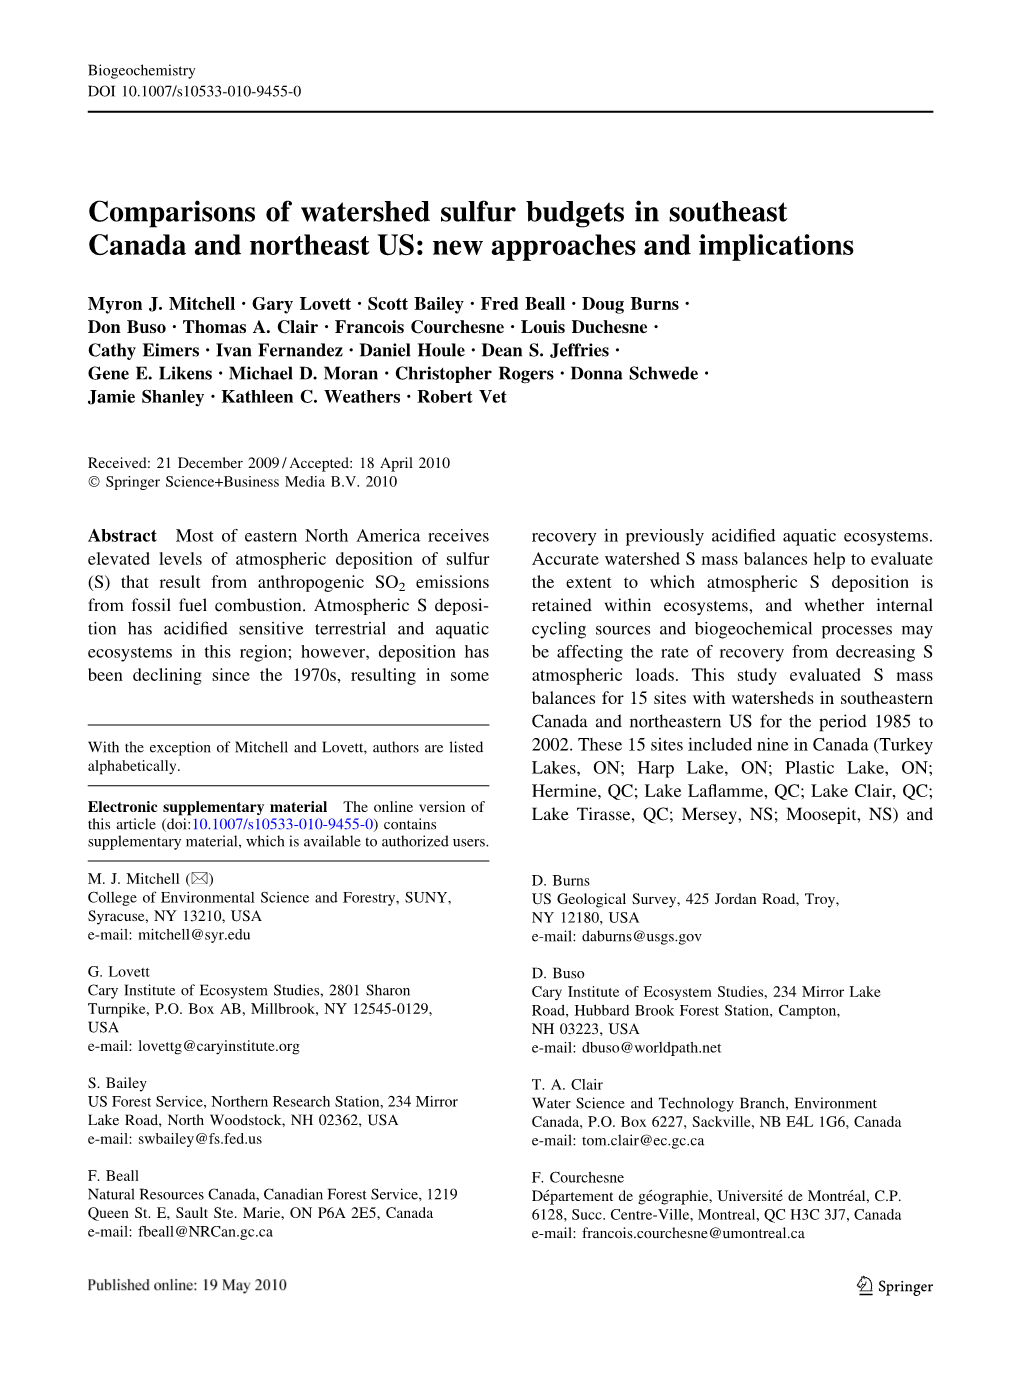 Comparisons of Watershed Sulfur Budgets in Southeast Canada and Northeast US: New Approaches and Implications